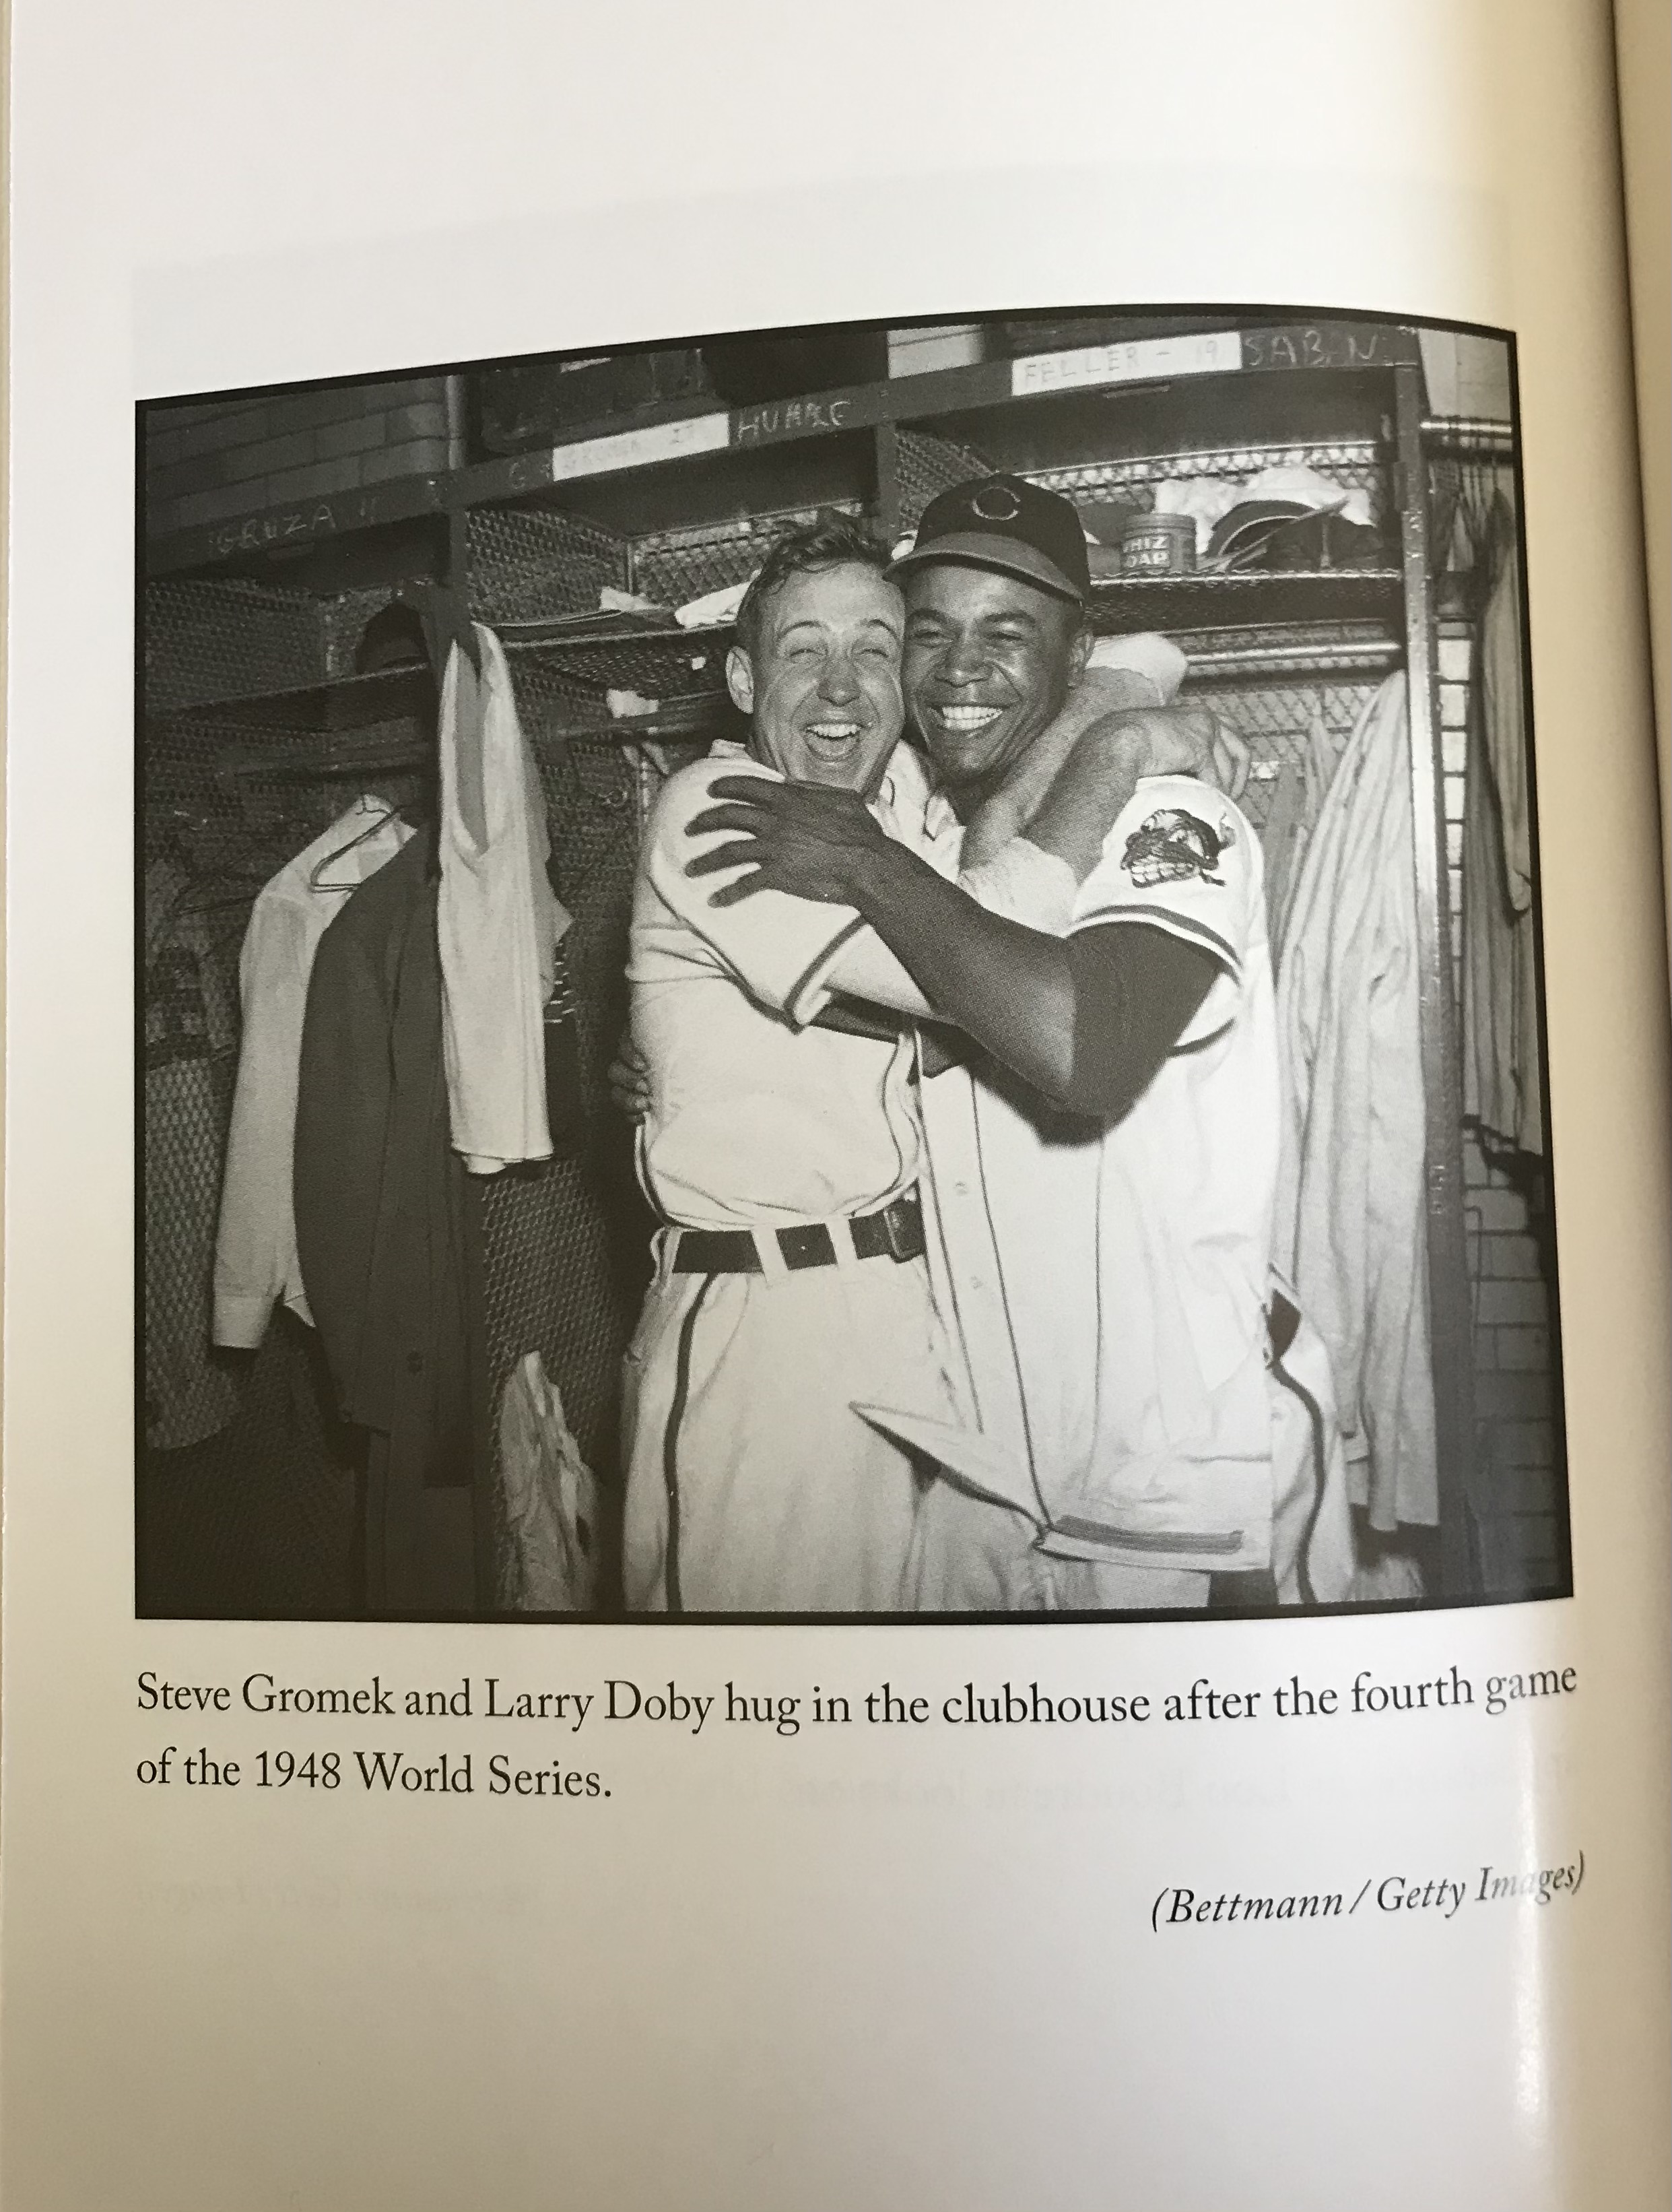 Don D. on Twitter: From the new book 'Our Team' by @LukeEpplin : The  famous photo of Gromek & Doby in the @Indians clubhouse during the 1948  World Series. I like how